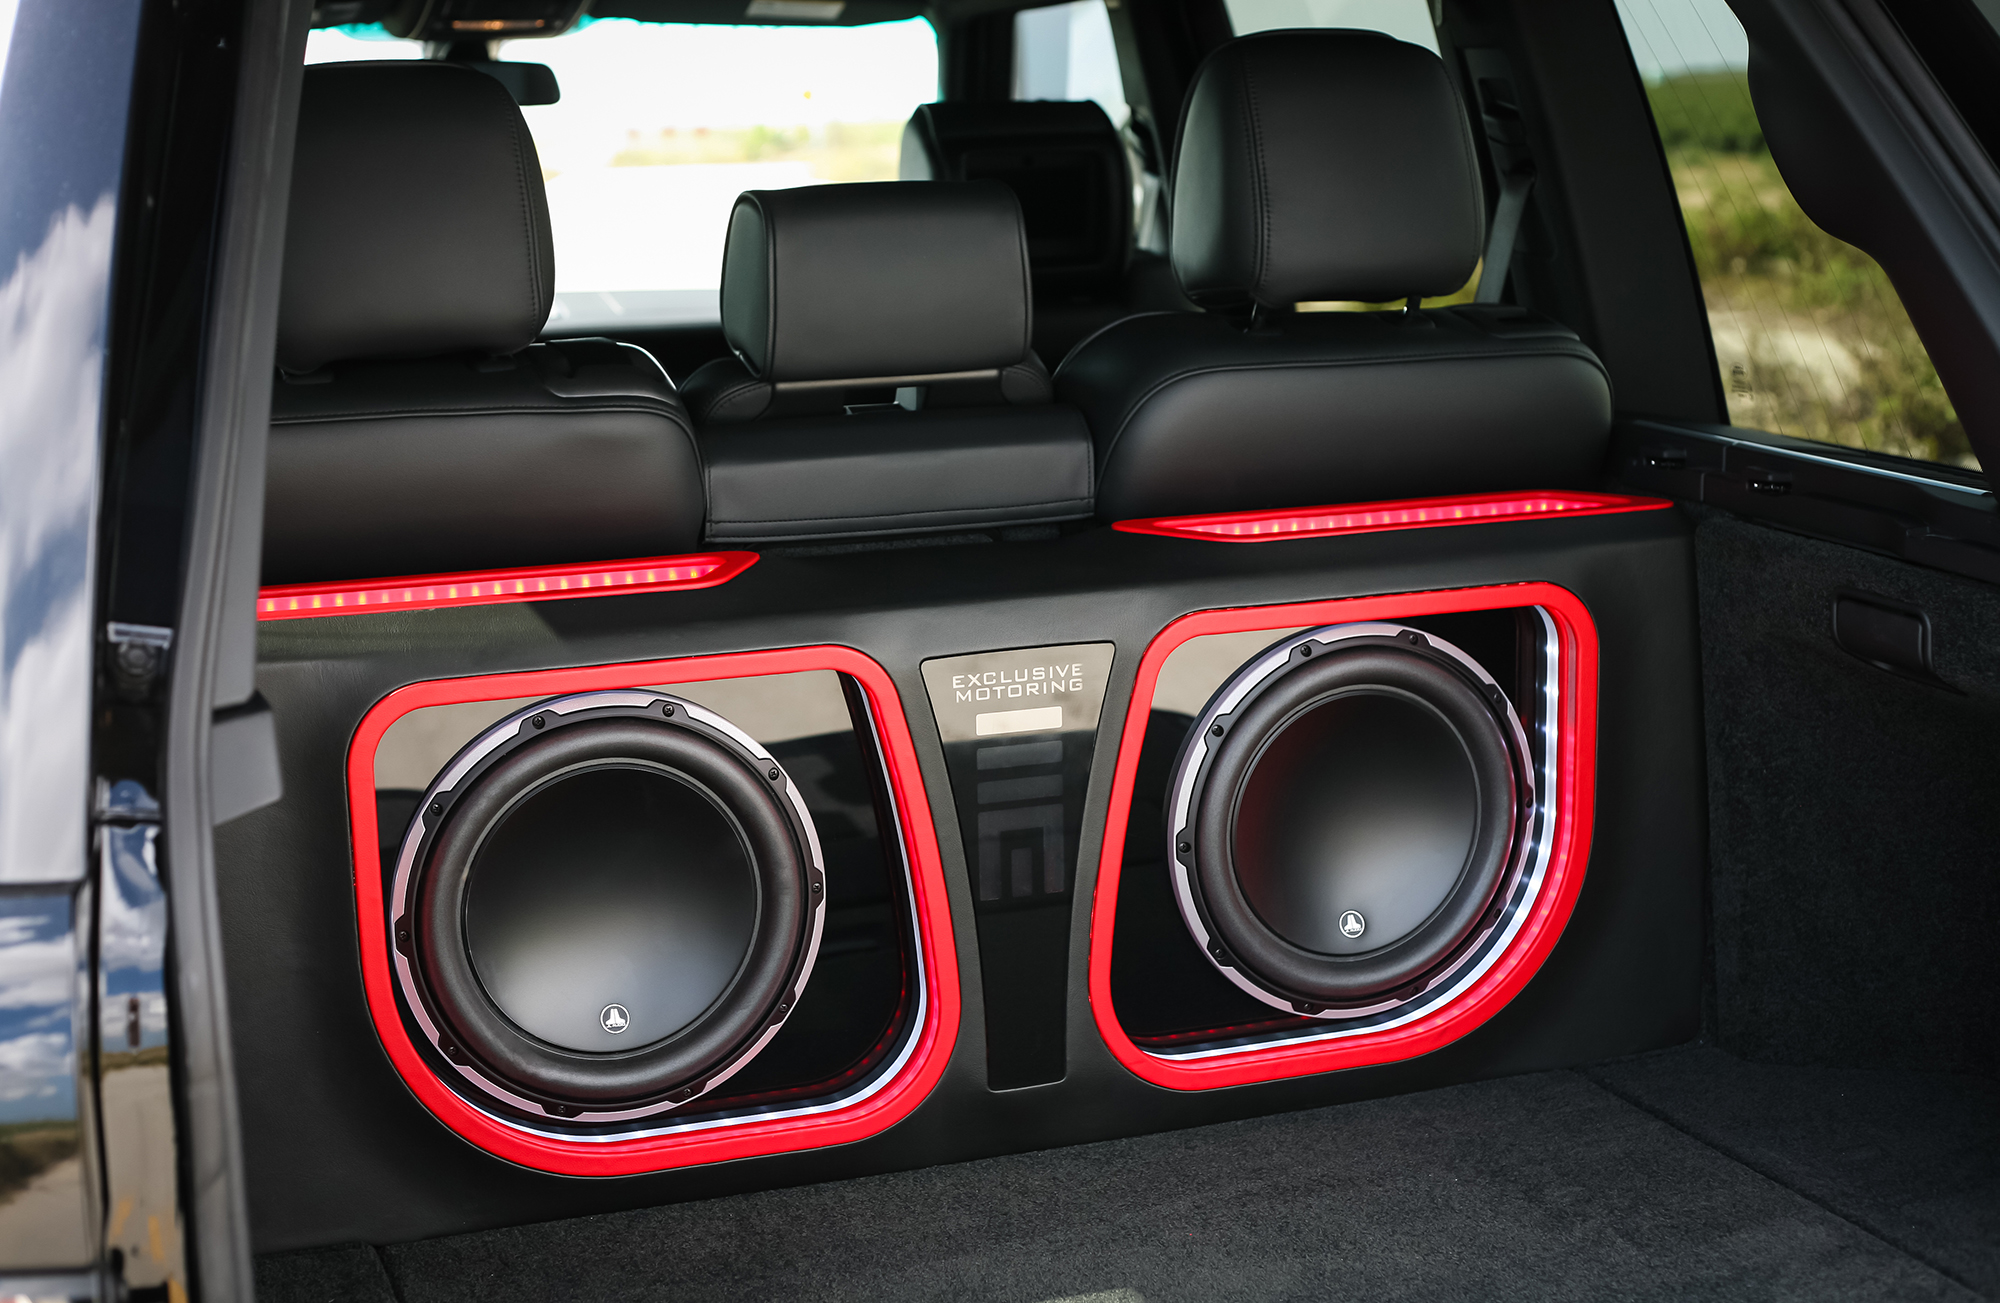 Range-Rover-2009-with-two-15-inch-JL-woofers (1).jpg (1.31 MB)